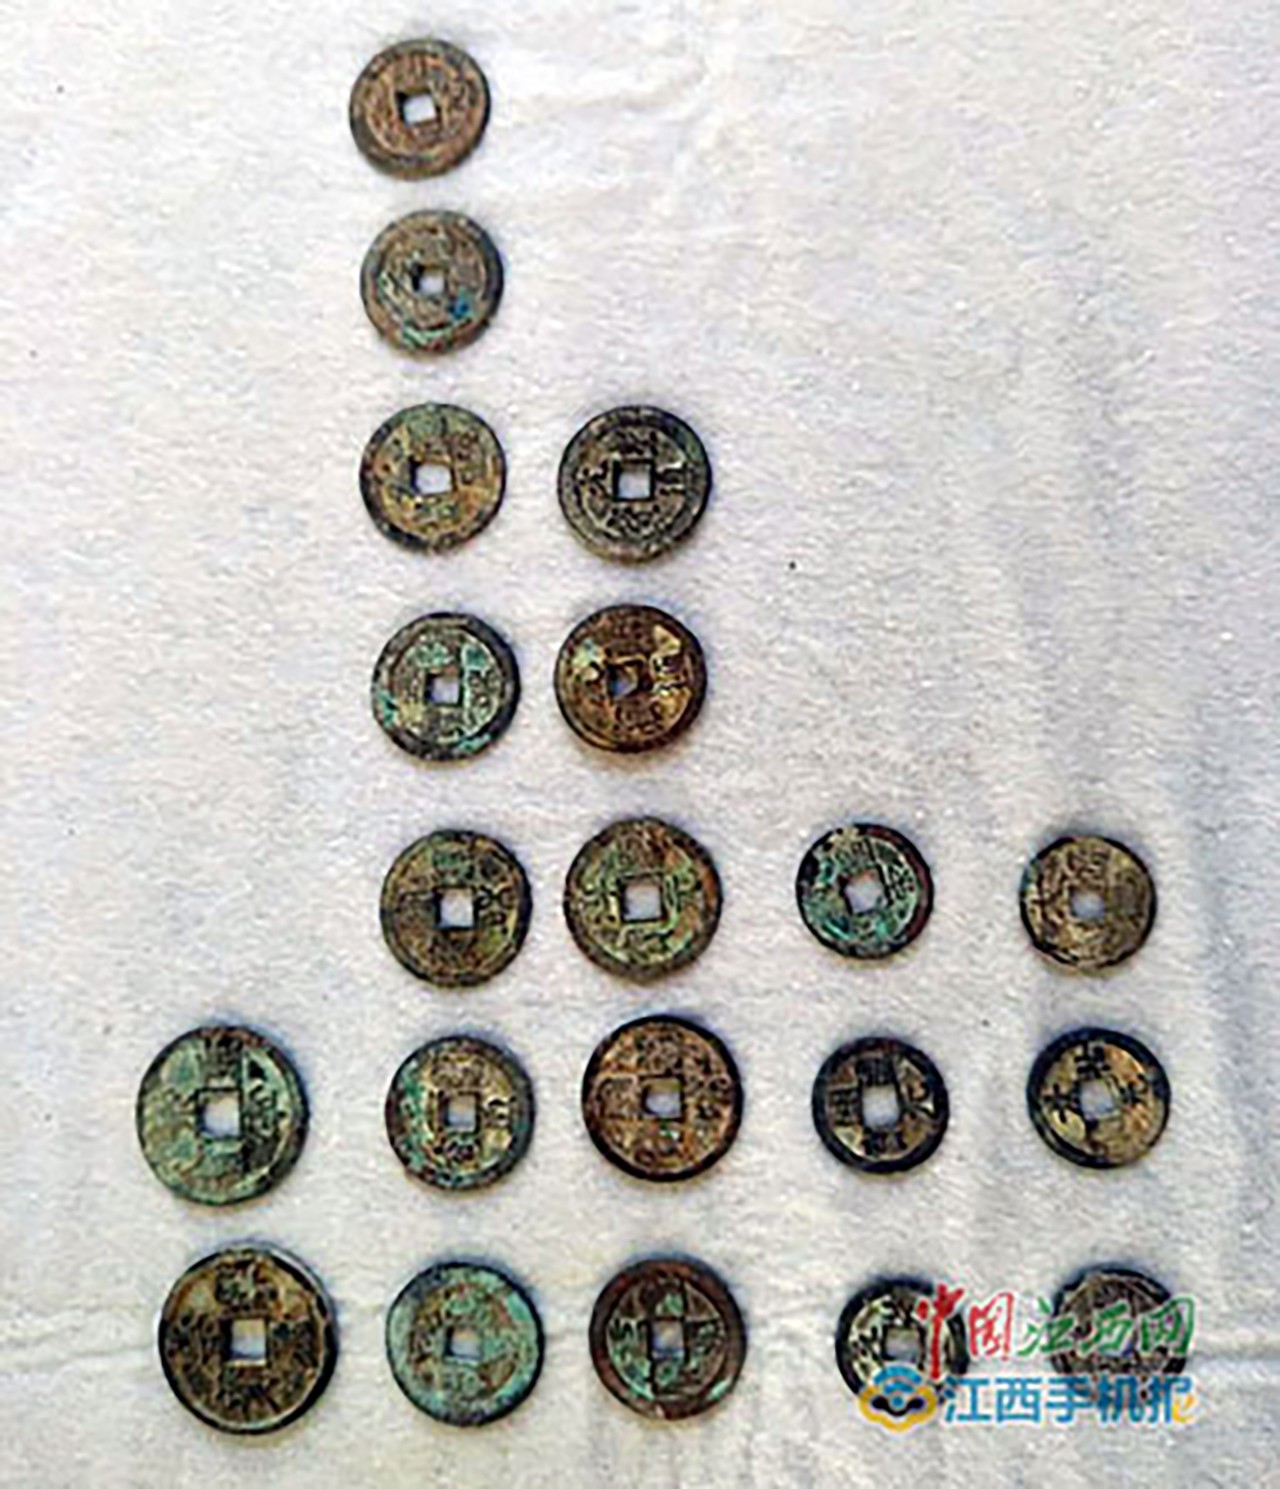 The copper coins are believed to date back to the Song dynasty. Photo: jxnews.com.cn